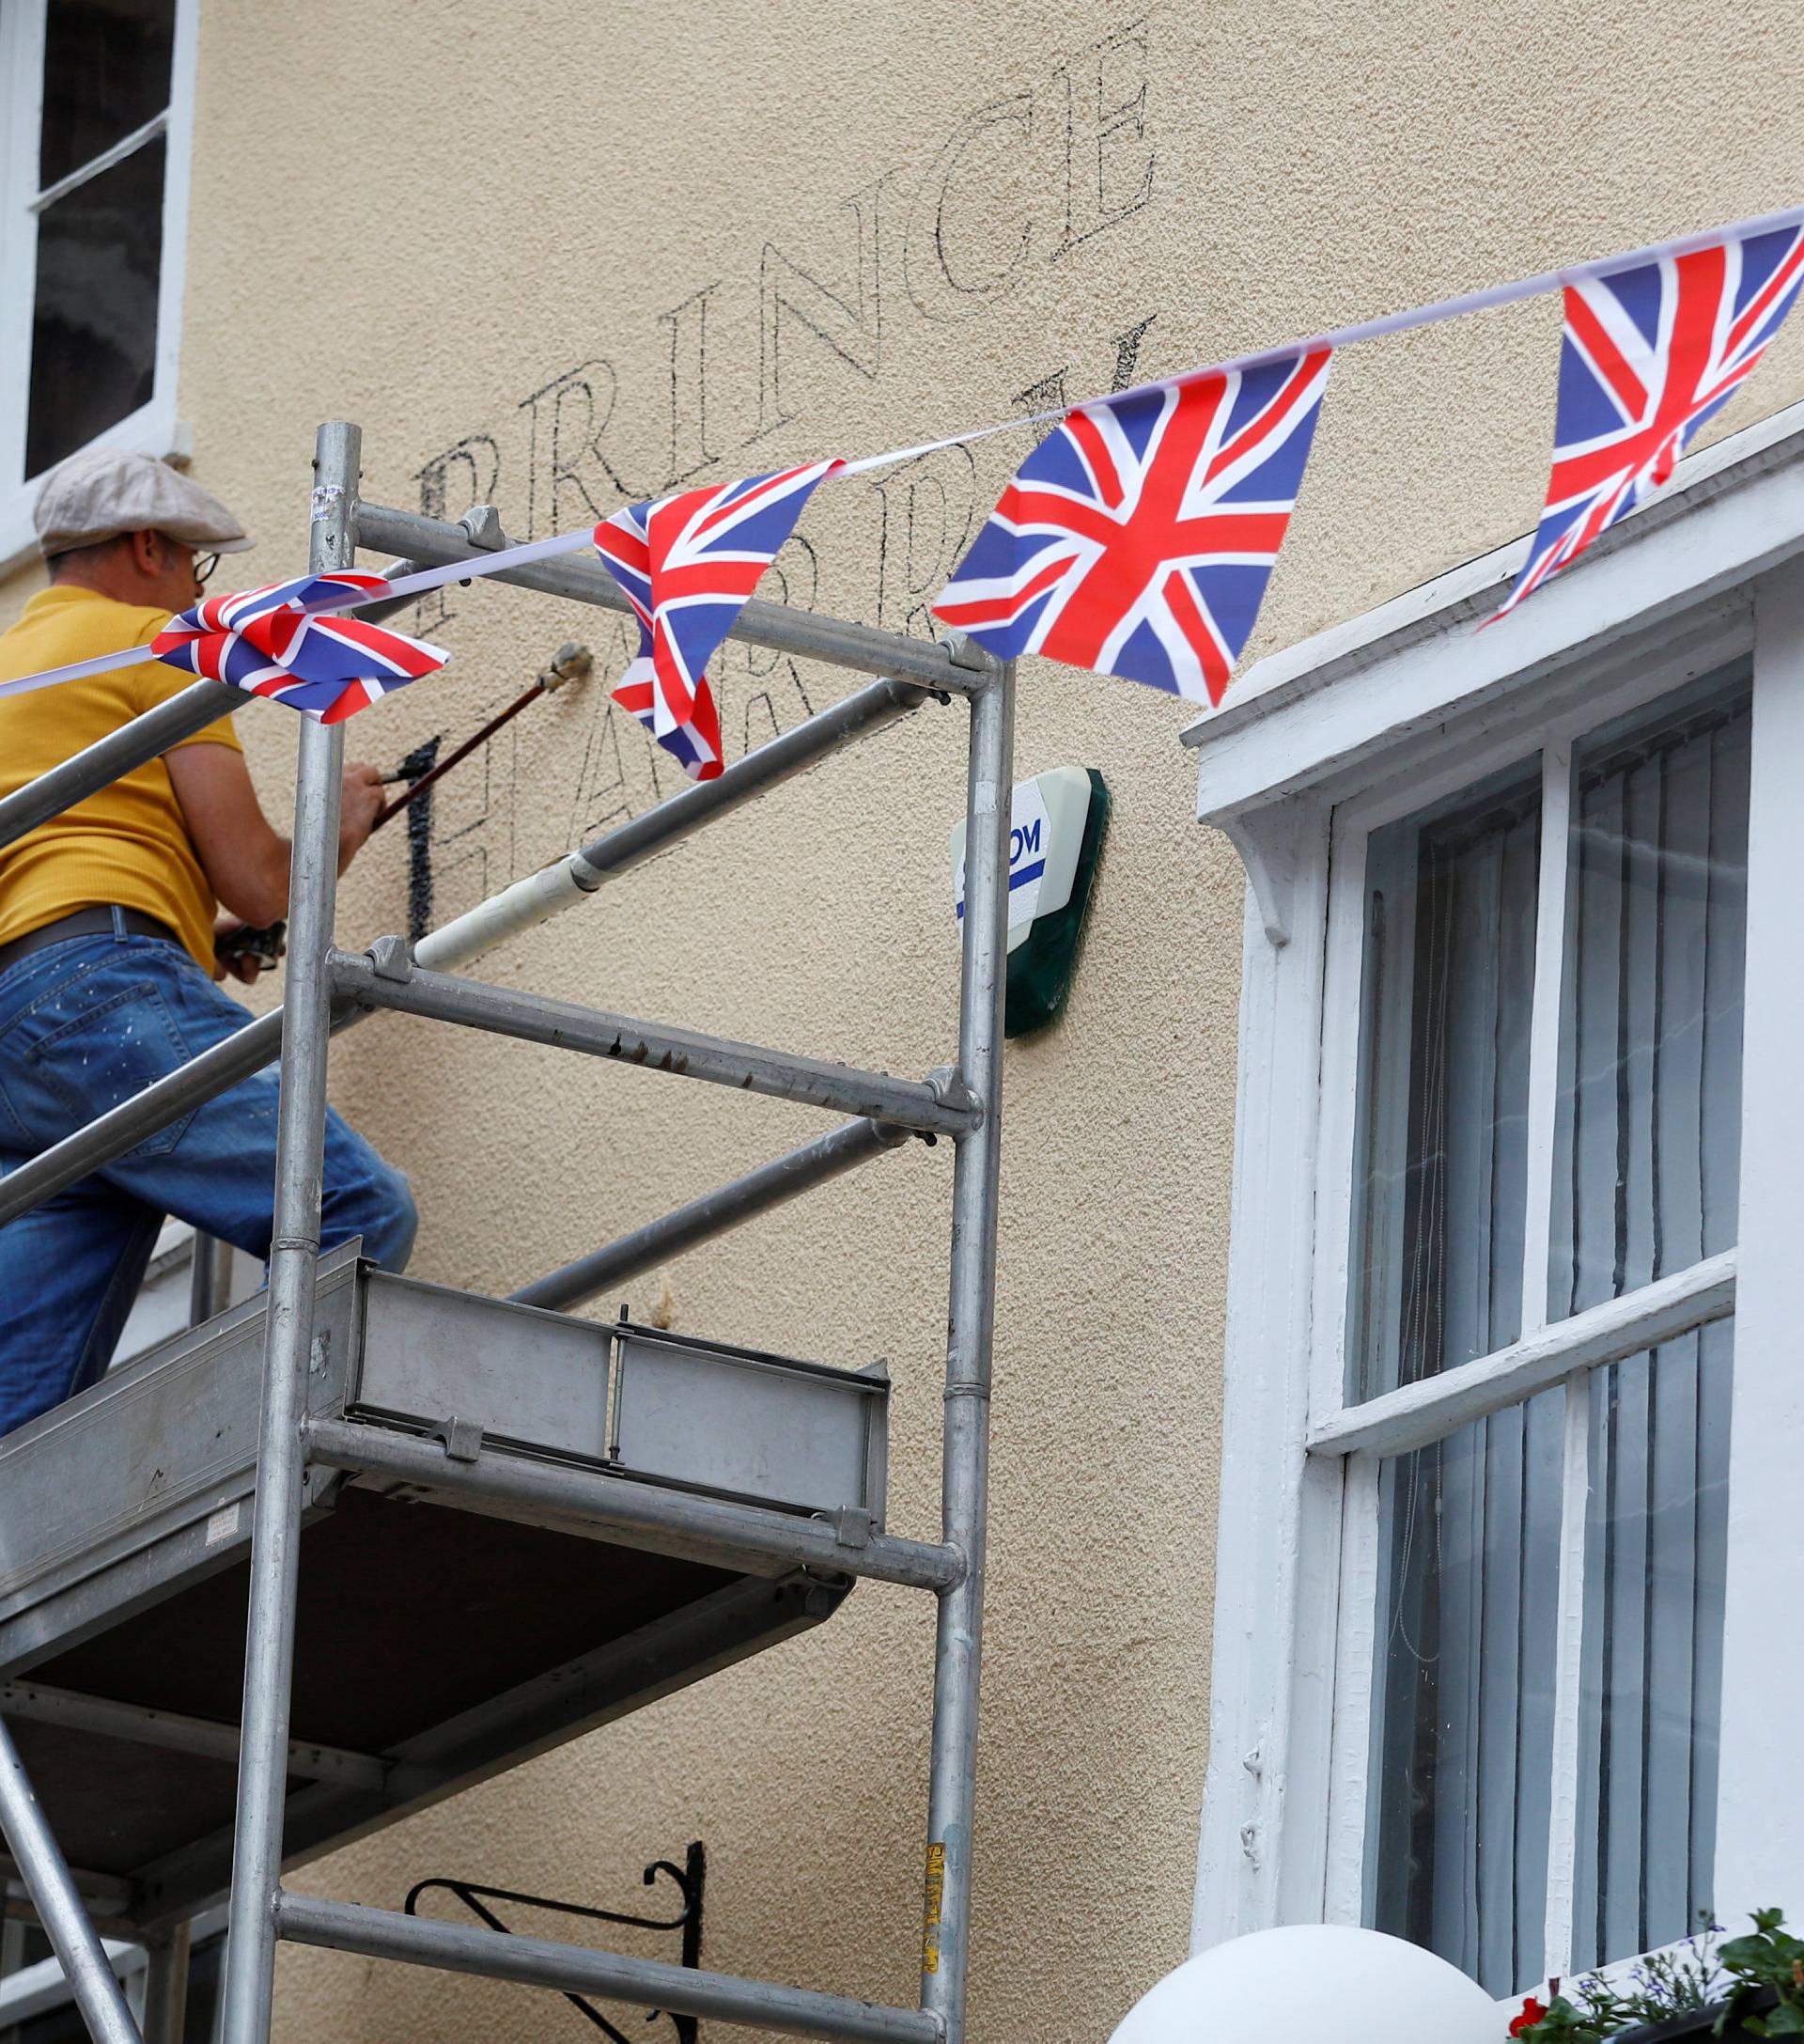 A worker paints the new name on a pub in honour of Prince Harry and Meghan Markle's wedding, in Windsor